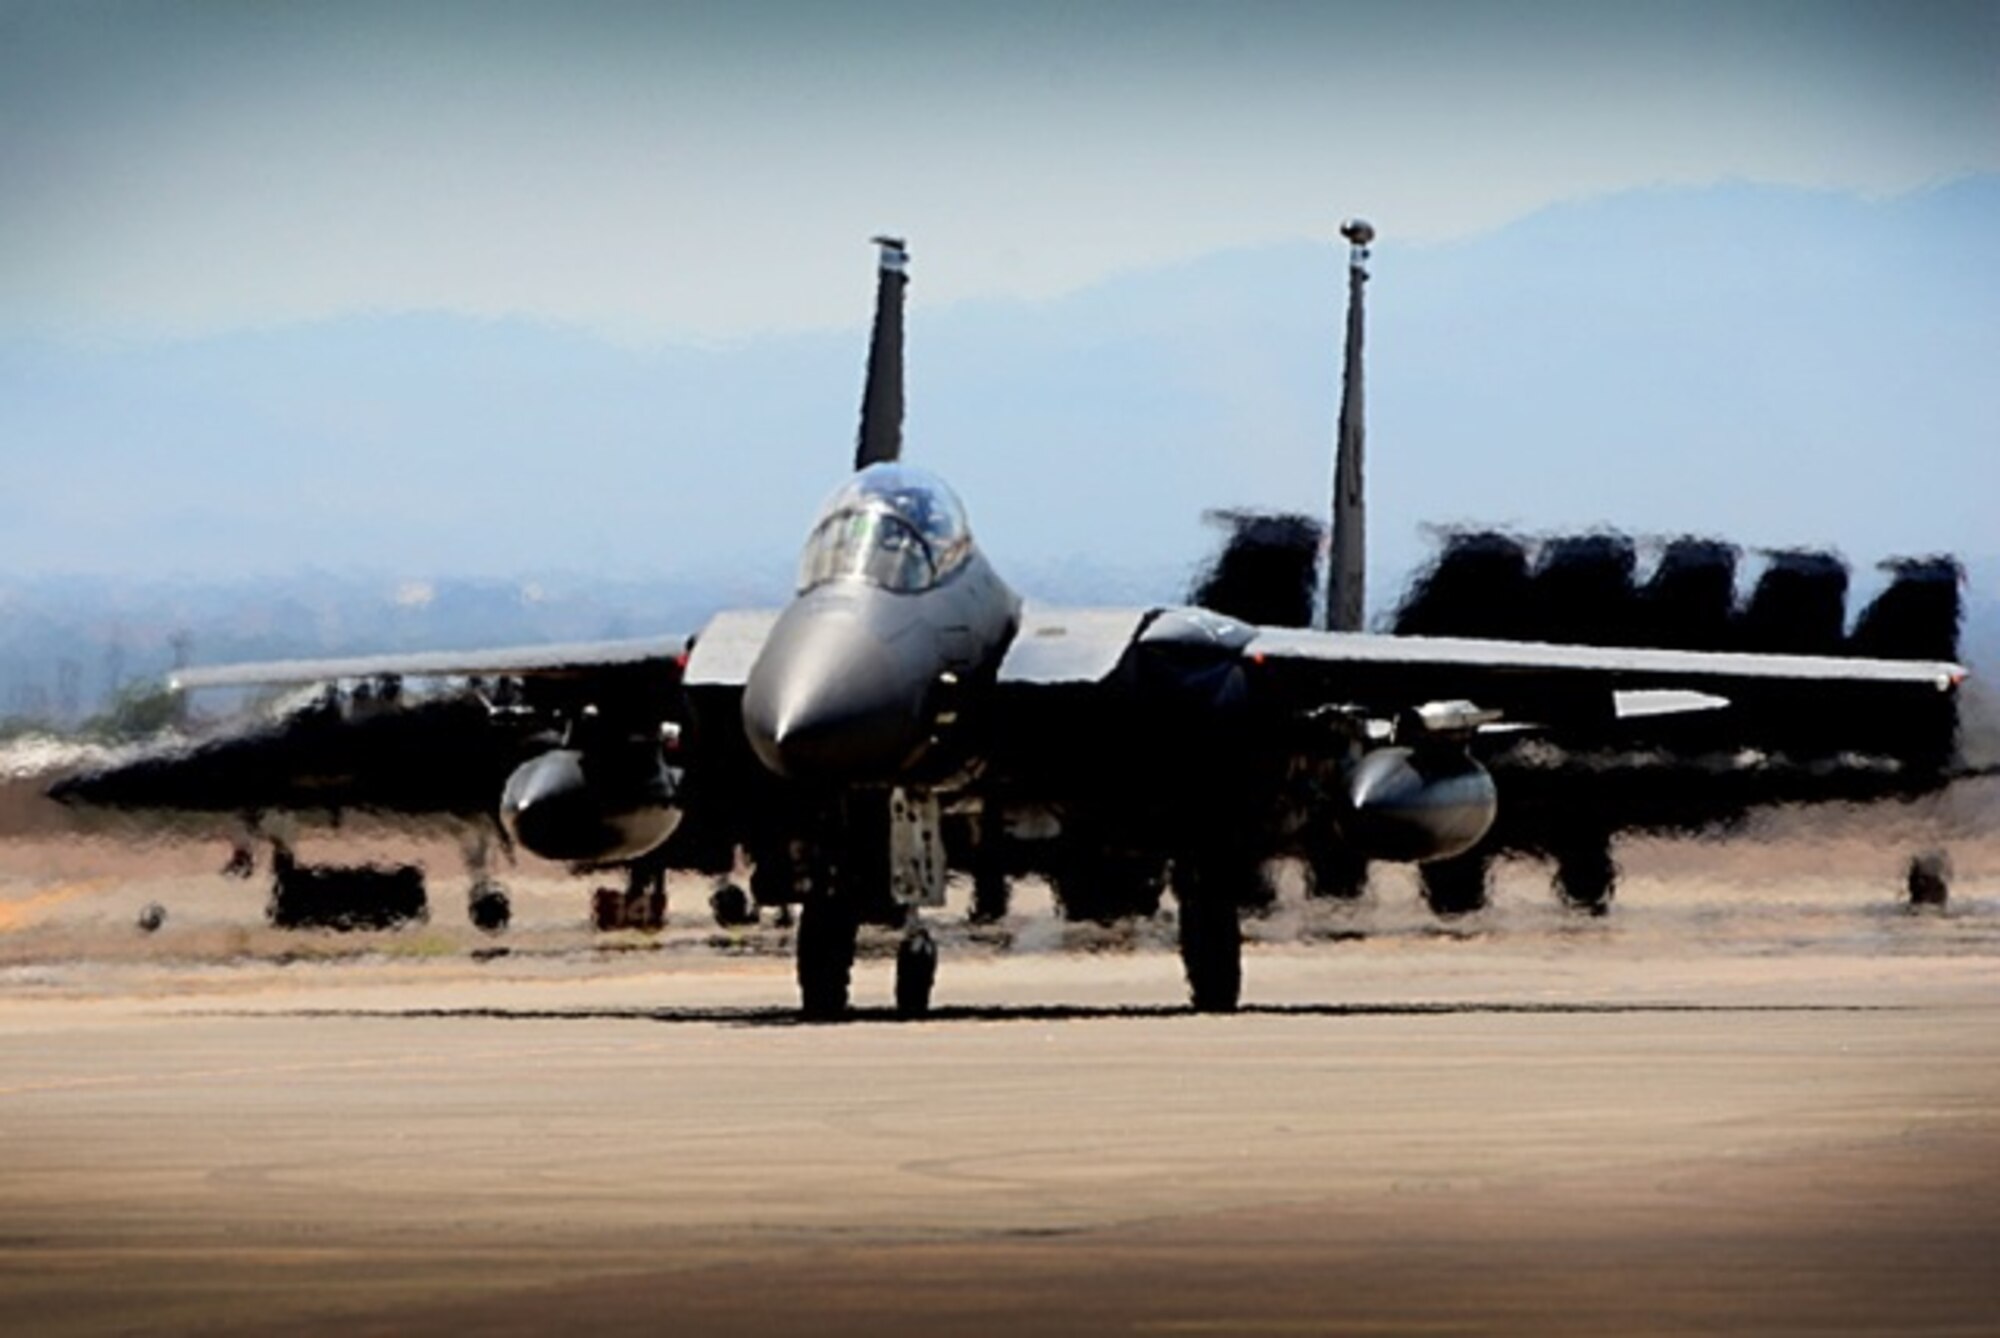 U.S. Air Force 1st Lieutenant Drew Lyons, 492nd Fighter Squadron, F-15E Strike Eagle pilot, and 1st Lieutenant J. Paul Reasner, 492nd FS, F-15E Strike Eagle weapon systems officer, taxi for a sortie in support of exercise Red Flag 16-4 at Nellis Air Force Base, Nevada Aug 17. Red Flag is a realistic combat exercise involving U.S. and allied air forces conducing training operations on the 15,000 square mile Nevada Test and Training Range. (U.S. Air Force photo/ Tech. Sgt. Matthew Plew)